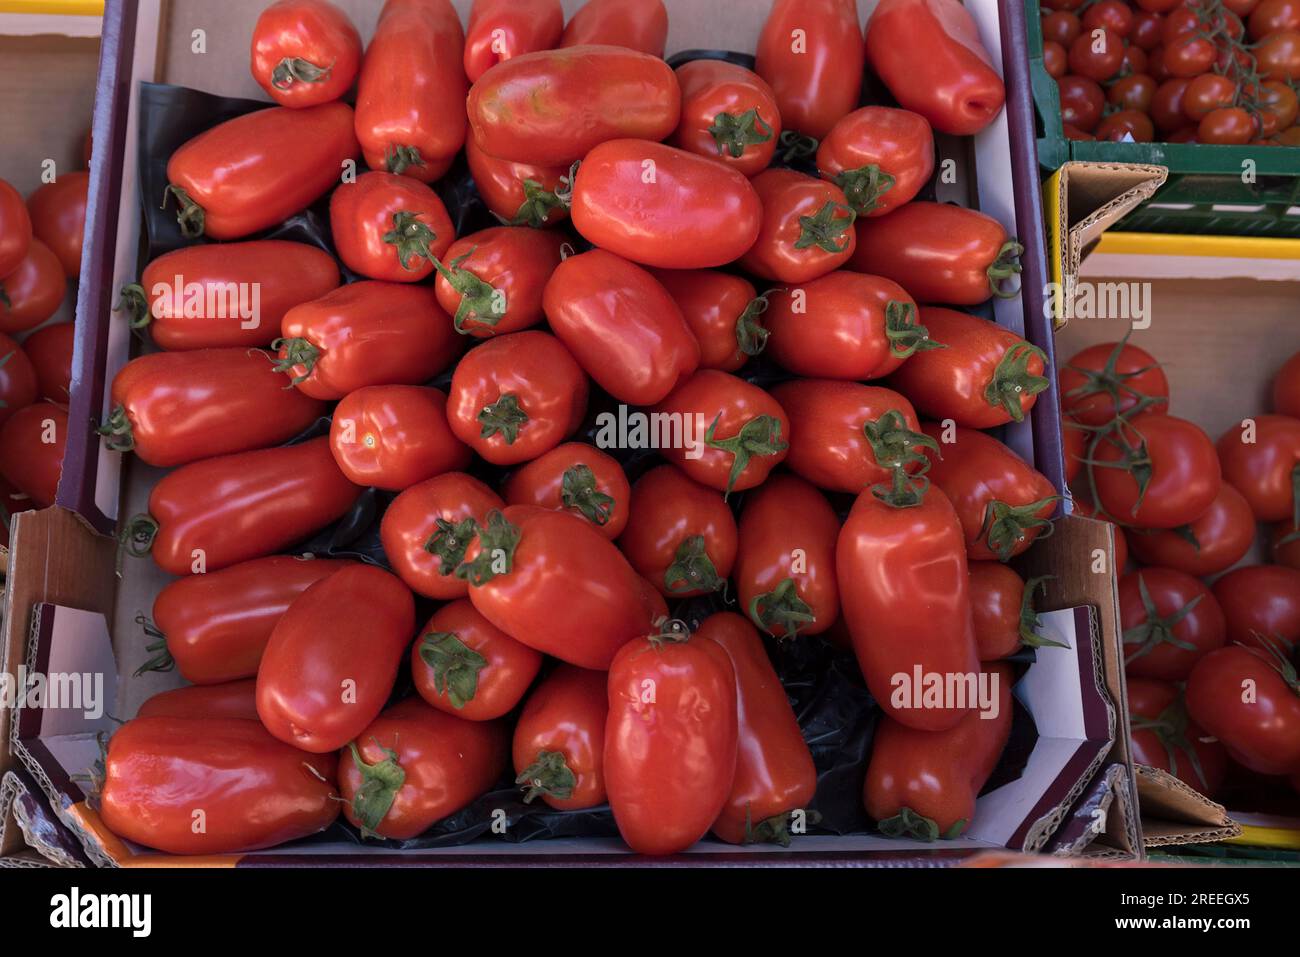 Tomatoes on a market stall, Baden-Wuerttemberg, Germany Stock Photo